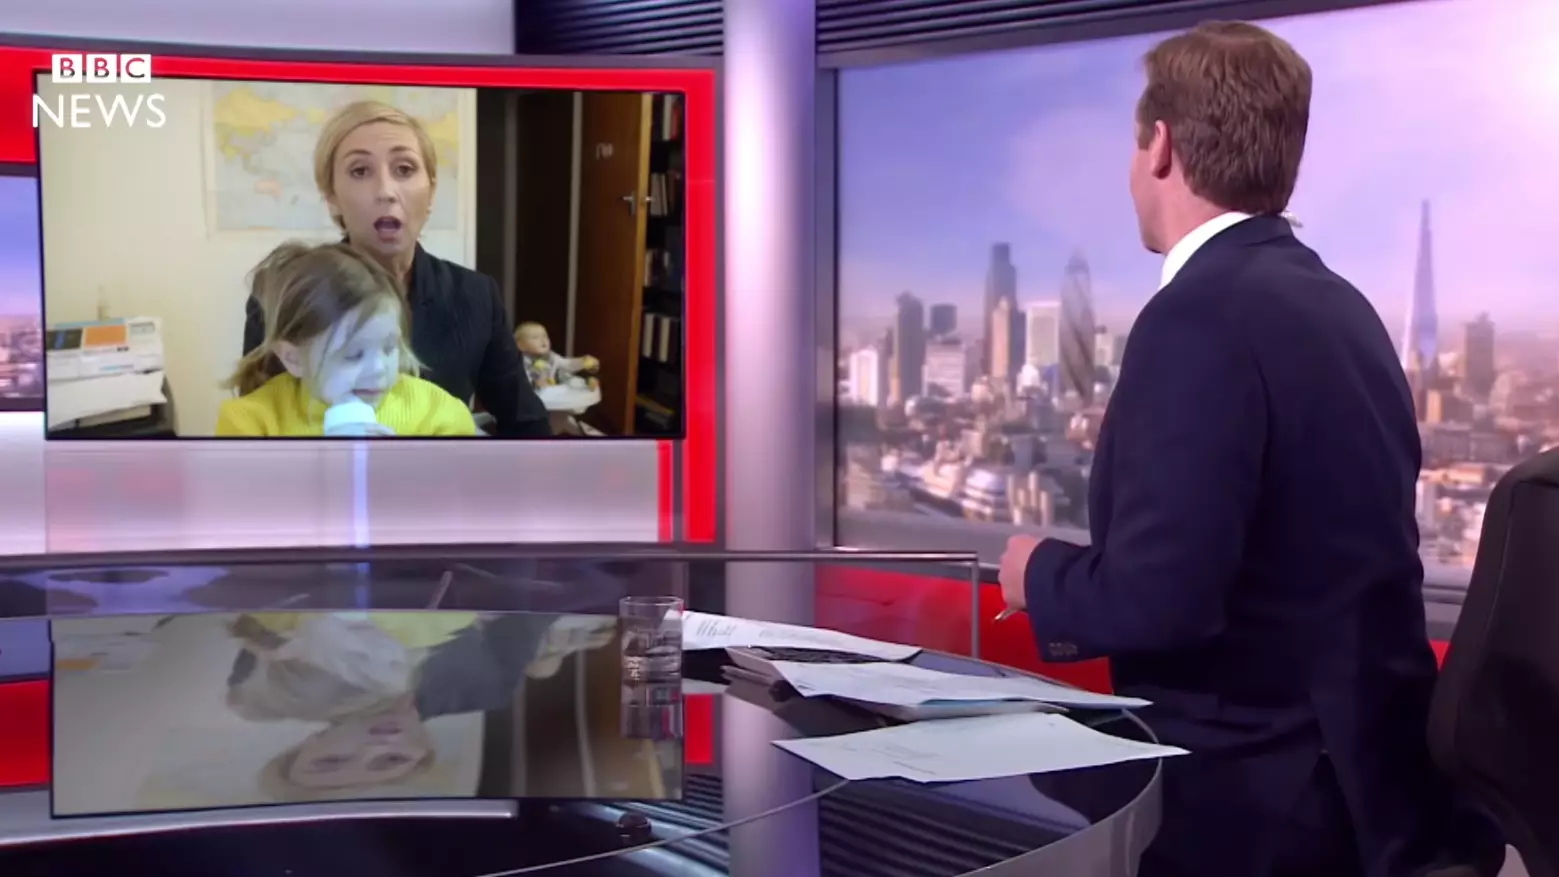 New Zealand Parody Of BBC Interview With Kids Is Hilarious